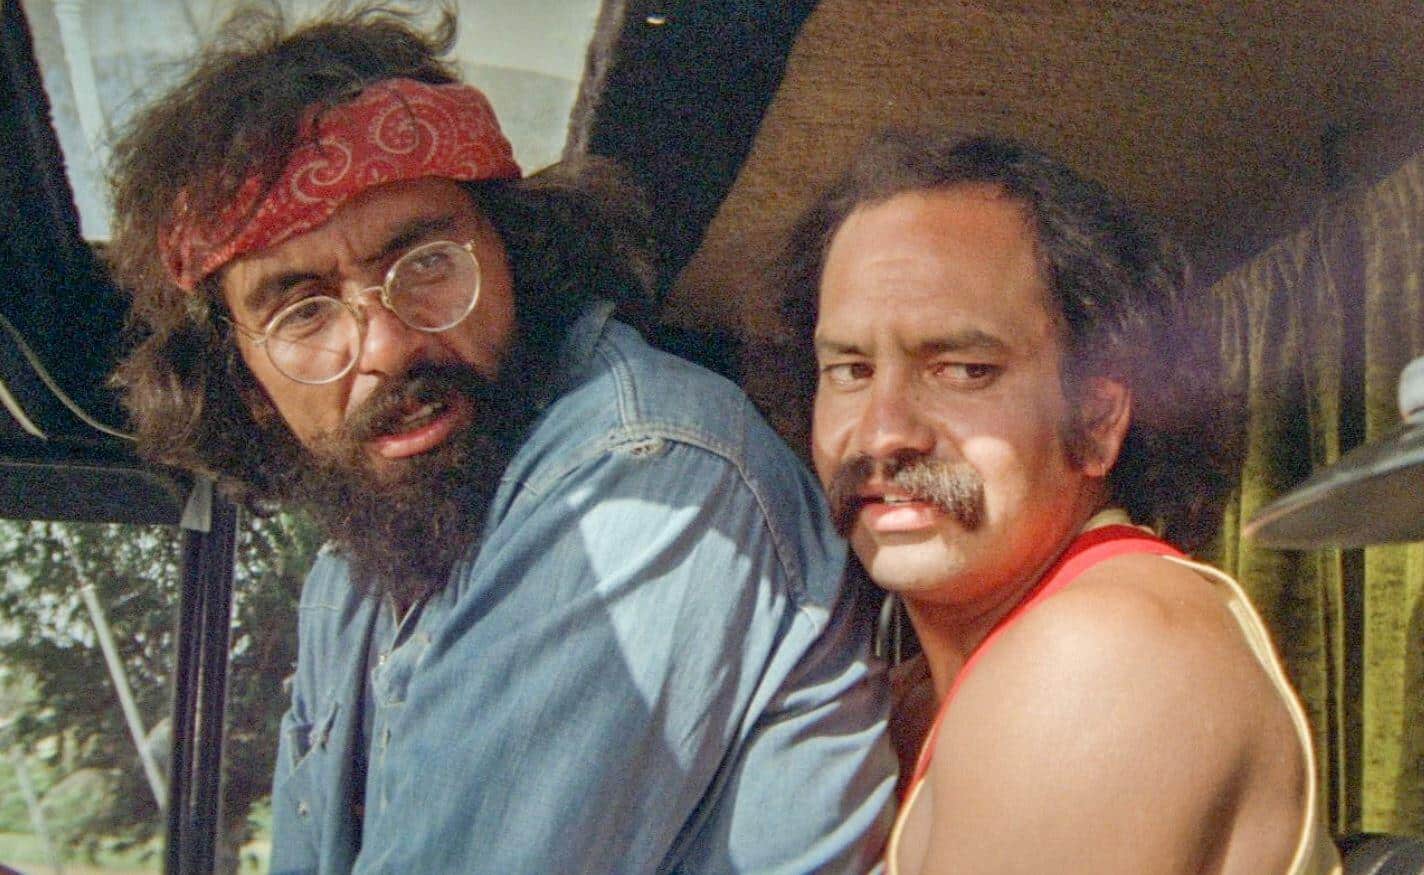 Cheech and chong announced on september 8, 2005 that the reunion film had b...